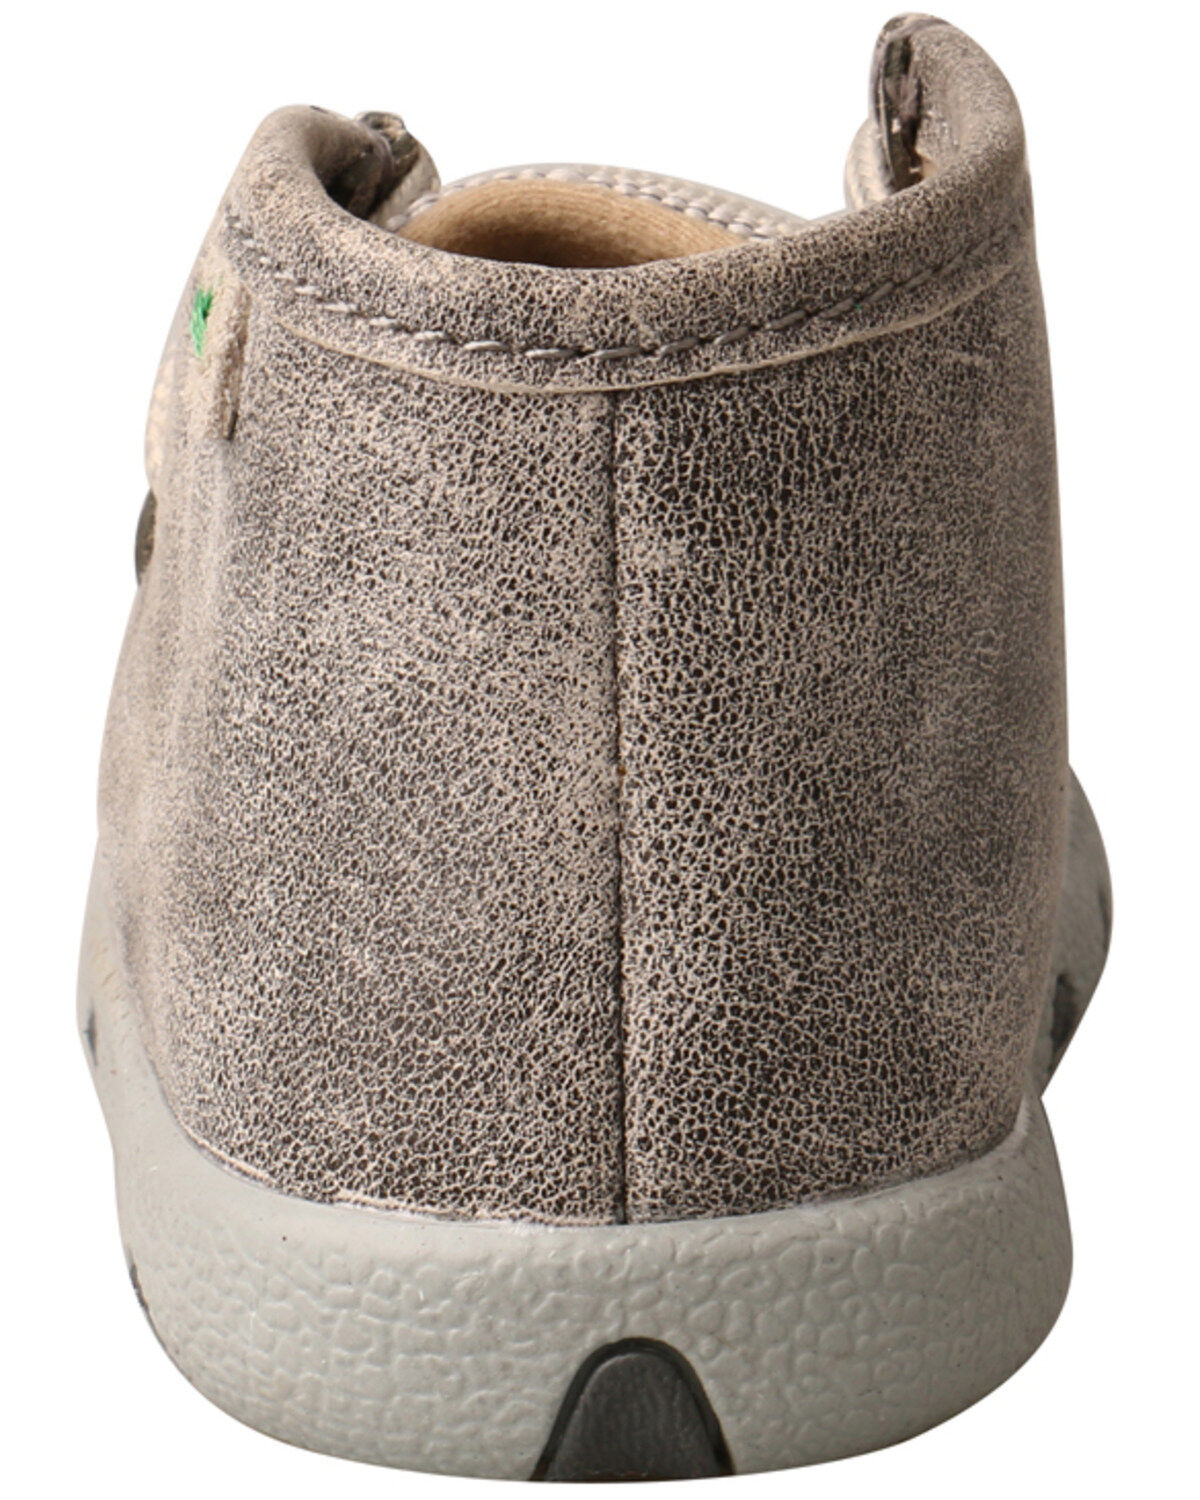 grey infant boots